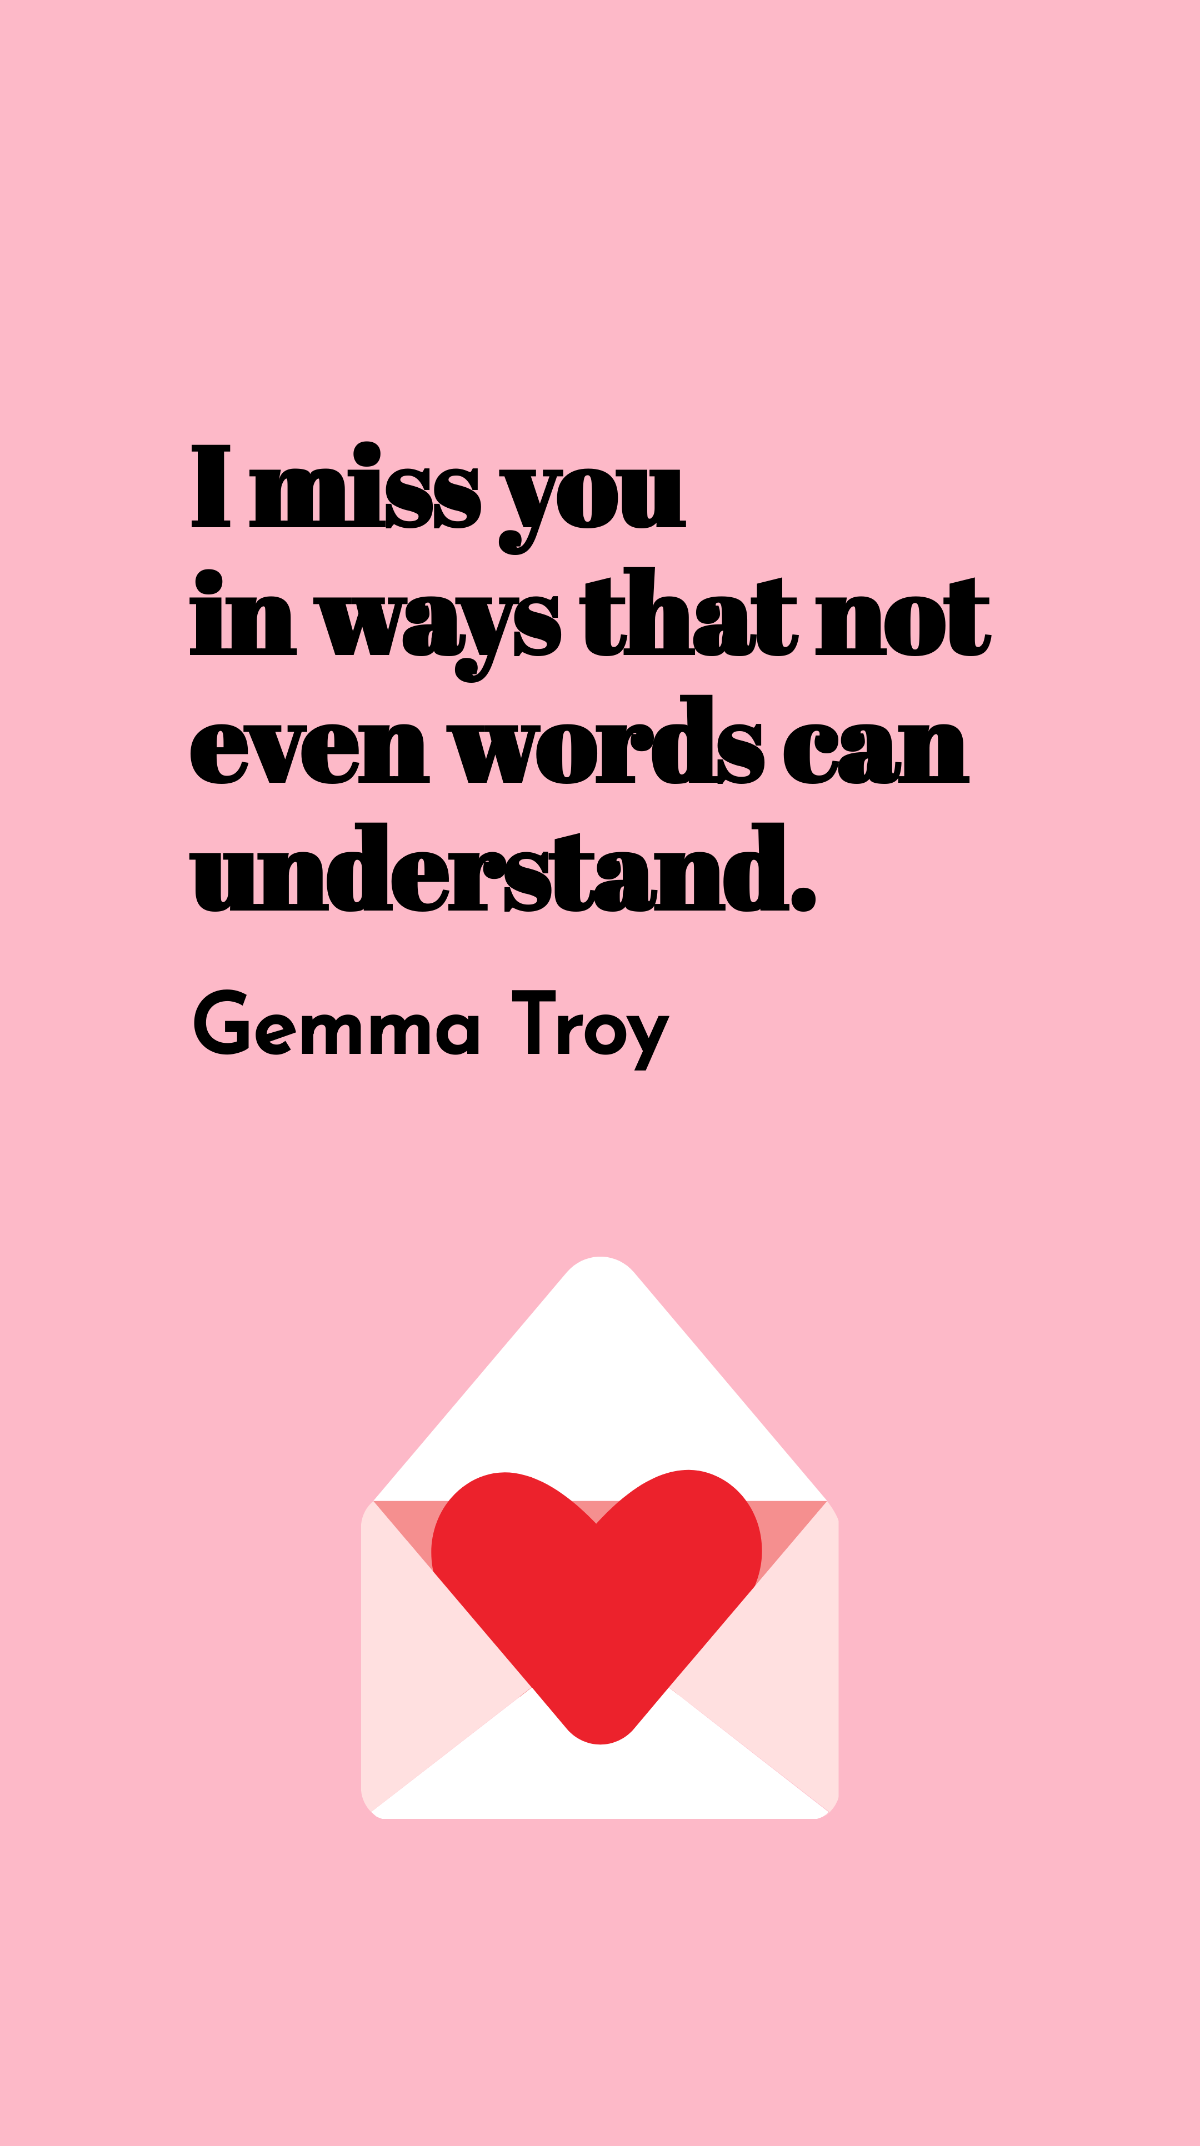 Gemma Troy - I miss you in ways that not even words can understand. Template